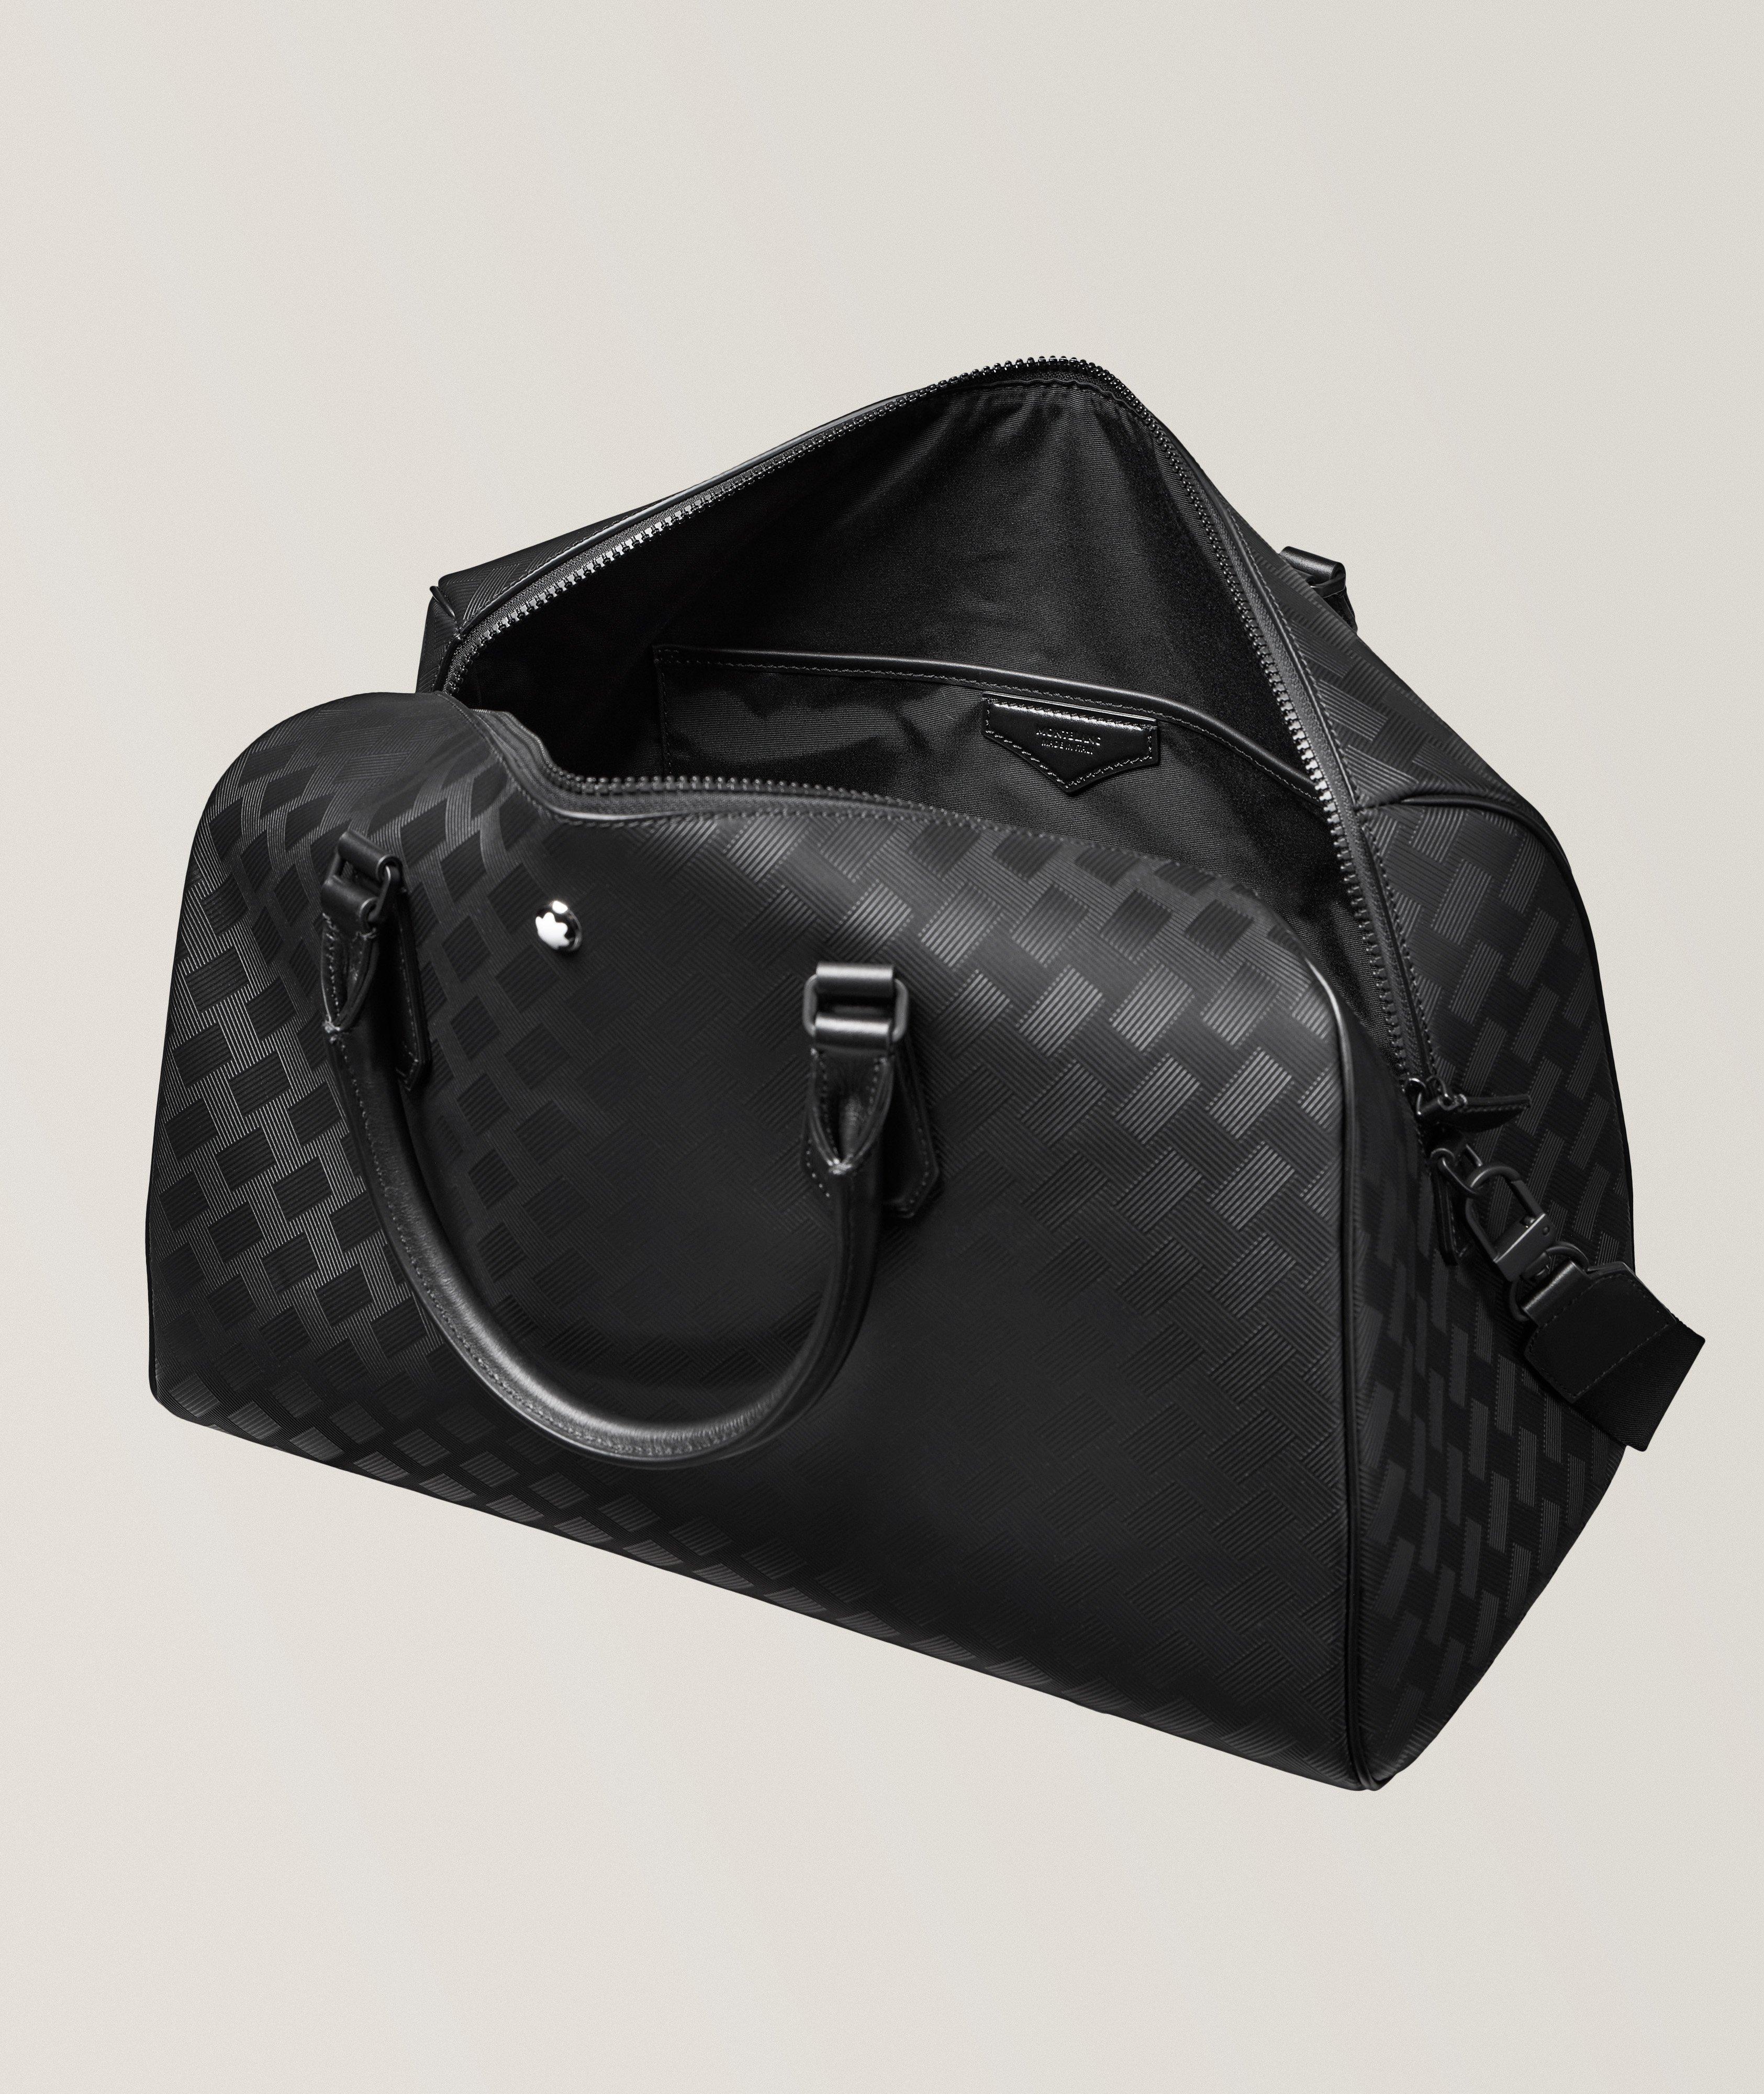 Extreme 3.0 Collection 142 Embossed Leather Duffle Bag image 1